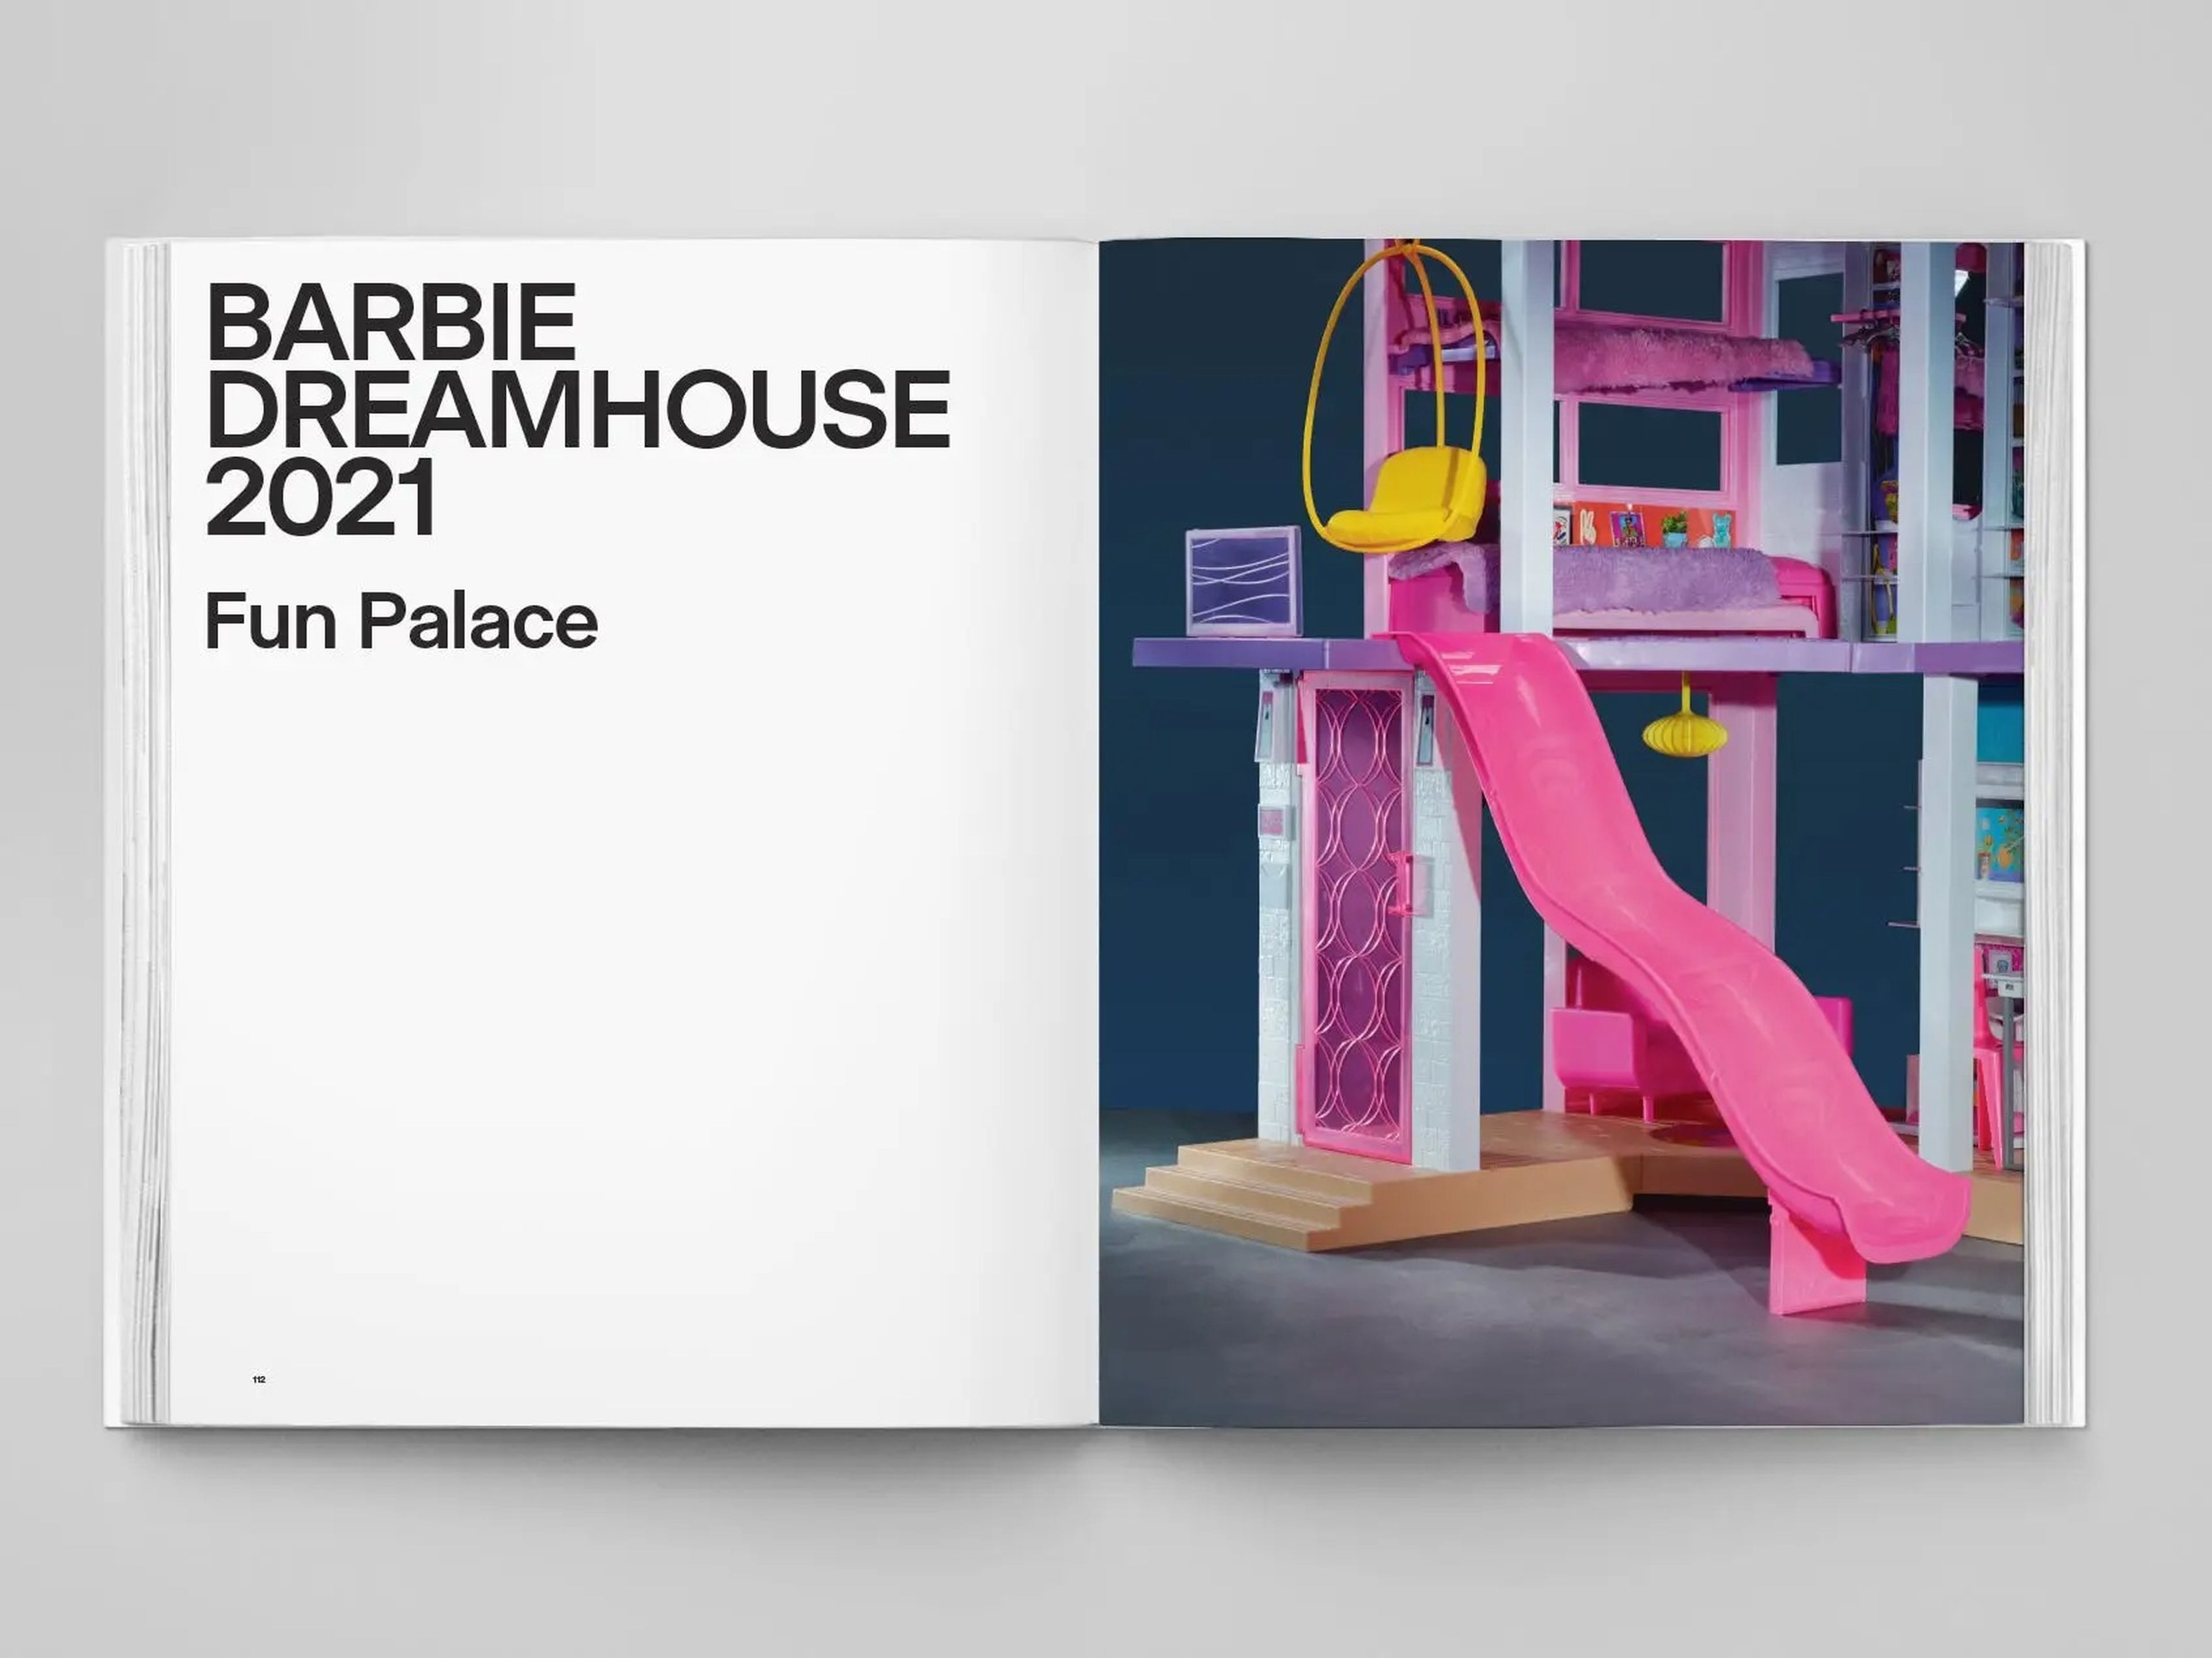 A spread of the 2021 Barbie Dreamhouse in "Barbie Dreamhouse: An Architectural Survey"